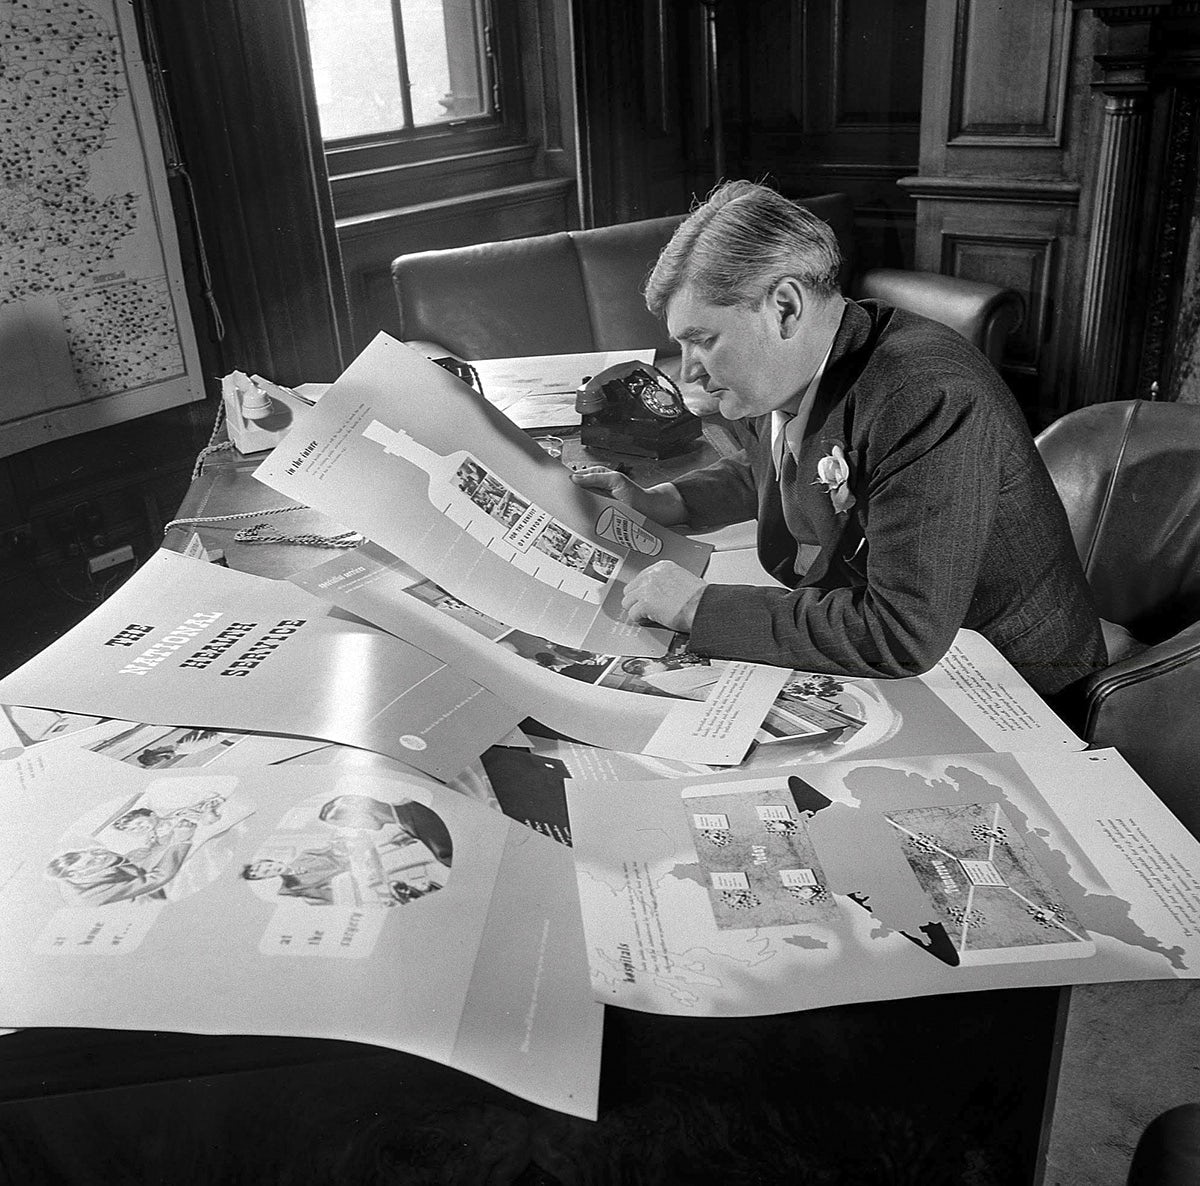 Black and white photograph of Aneurin Bevan, who spearheaded the creation of the NHS, reviewing documents on a table